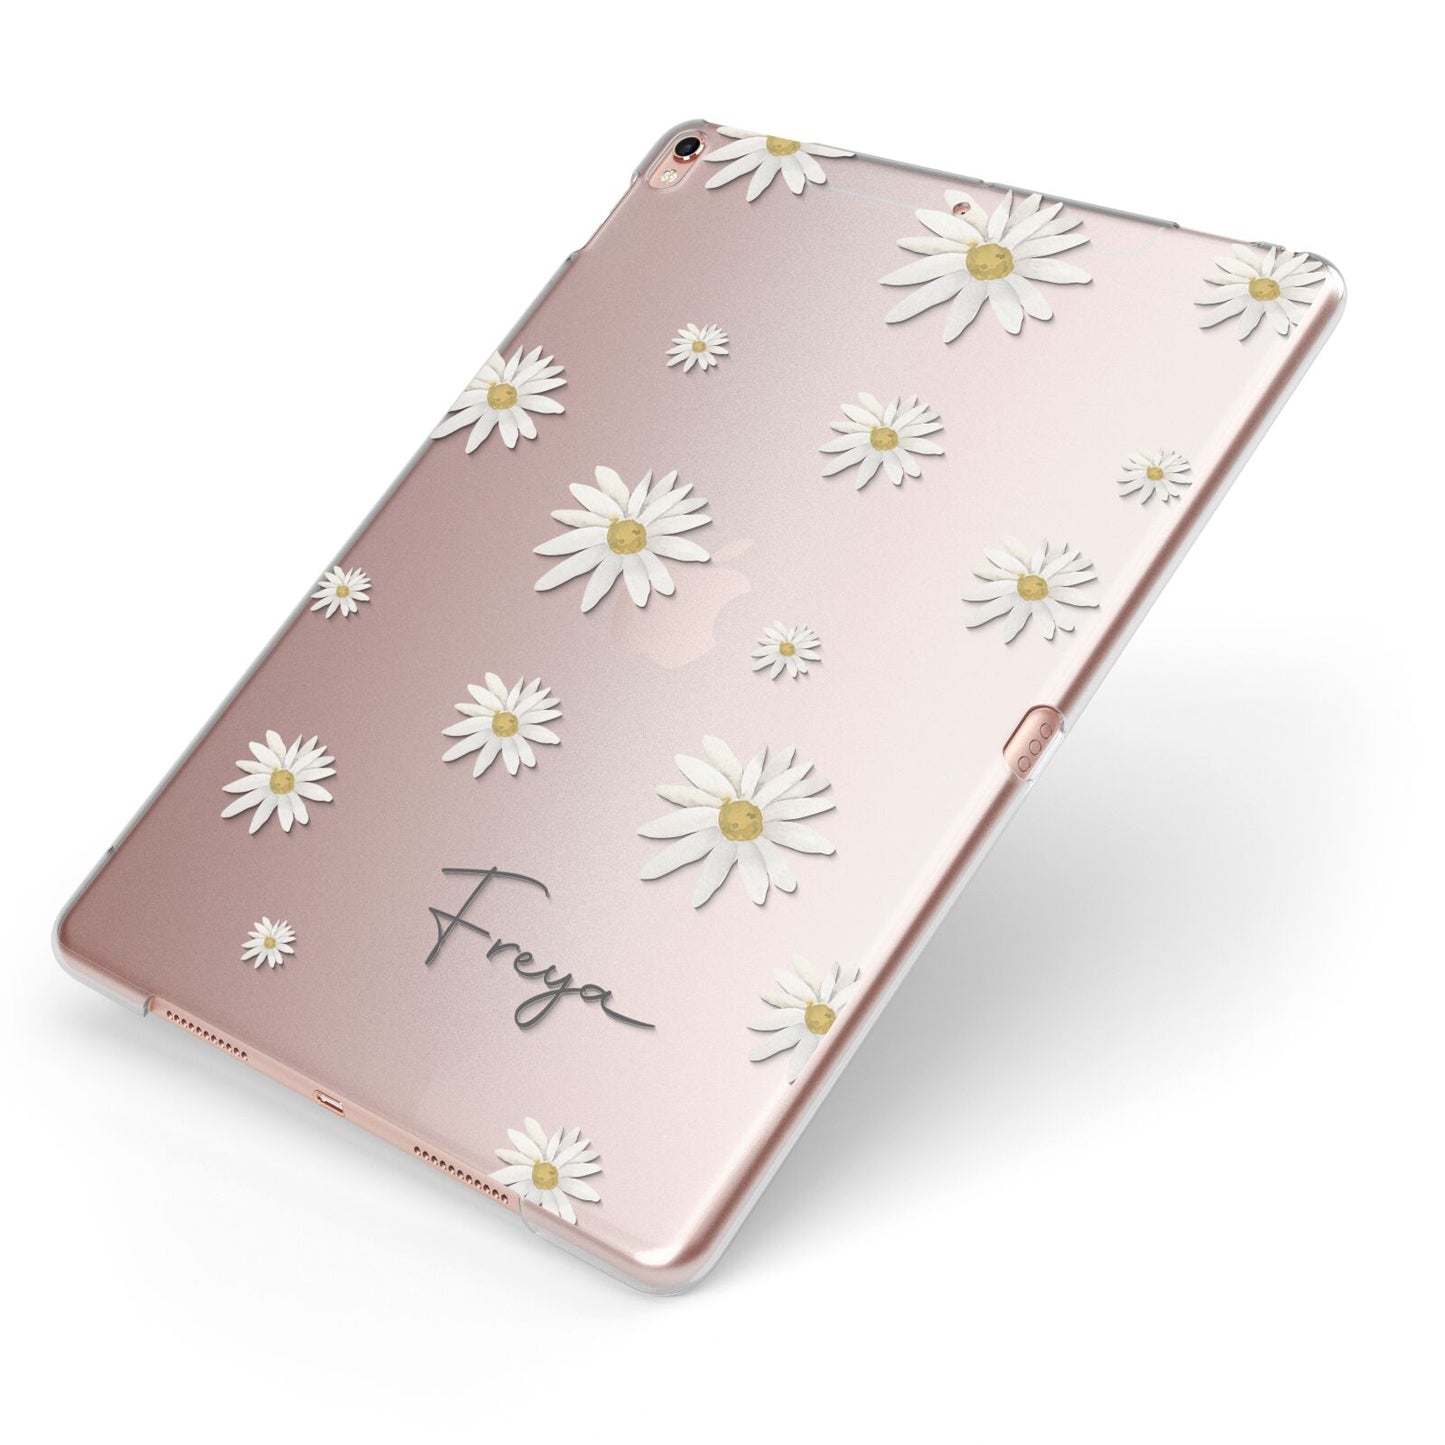 Personalised Vintage Daisy Apple iPad Case on Rose Gold iPad Side View